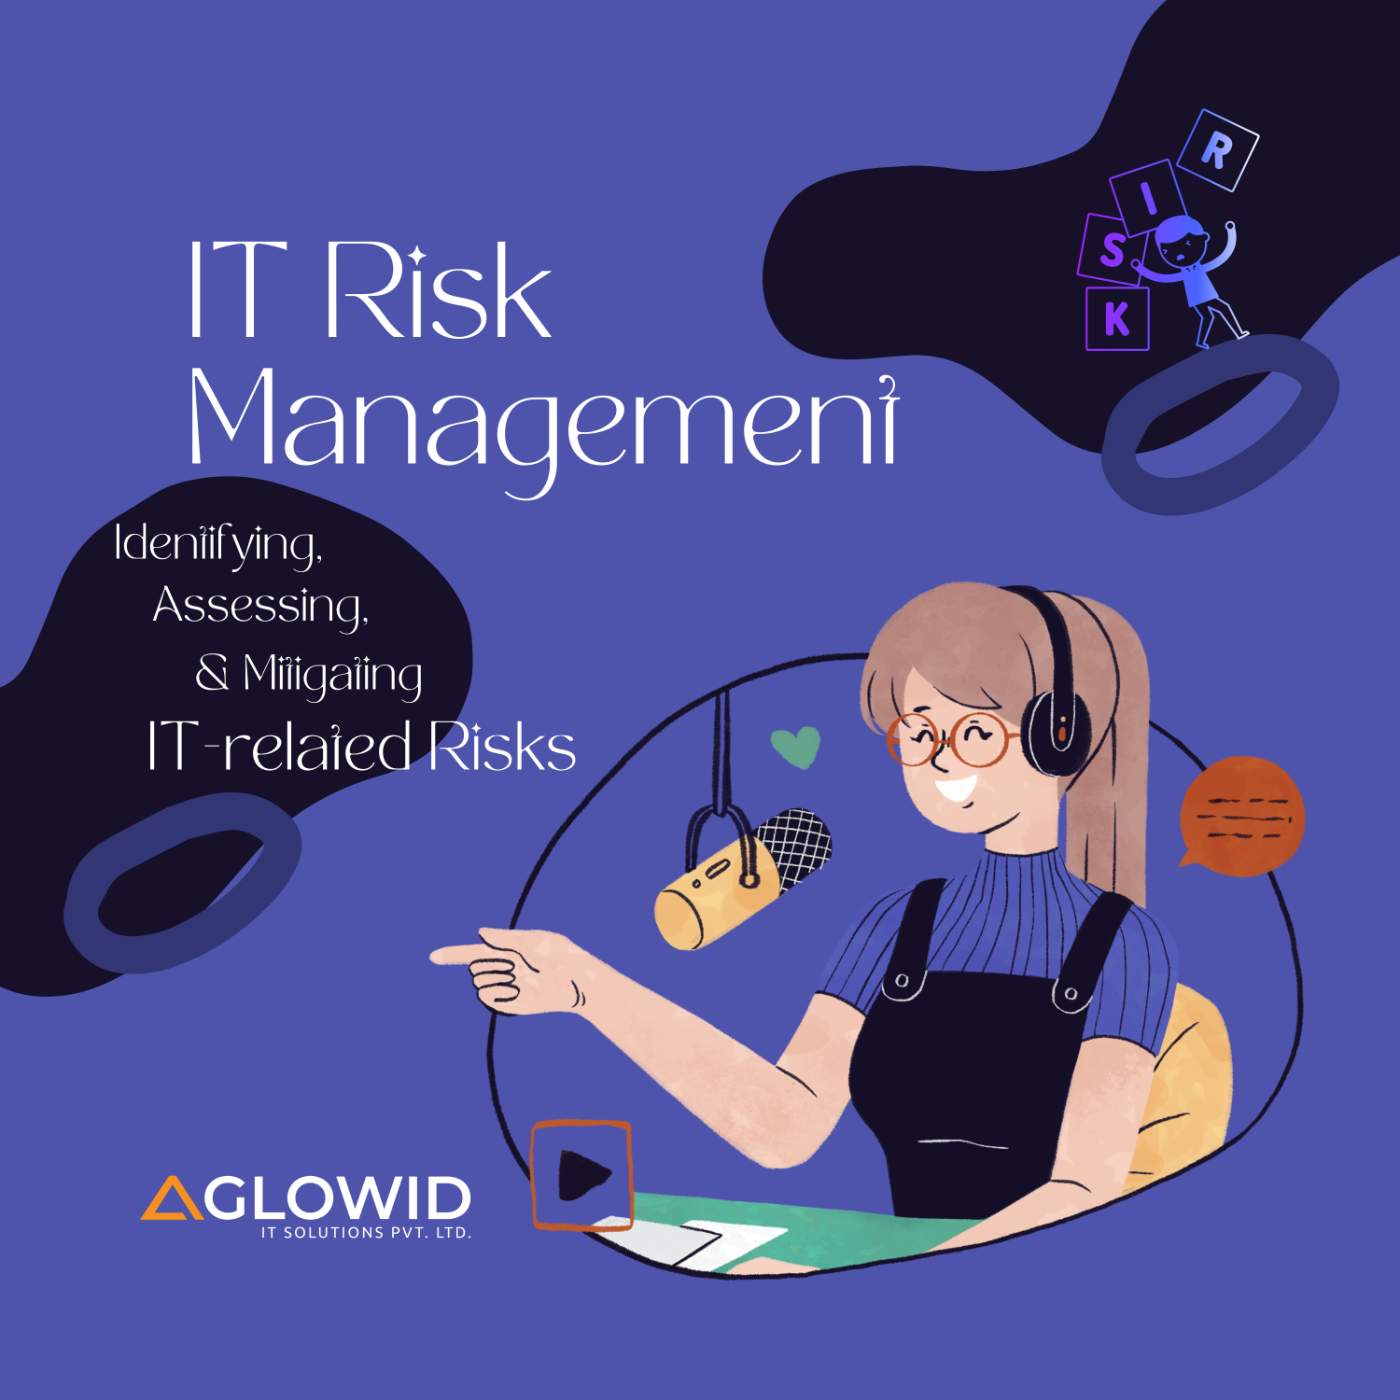 IT Risk Management: Identifying, Assessing, & Mitigating IT-related Risks